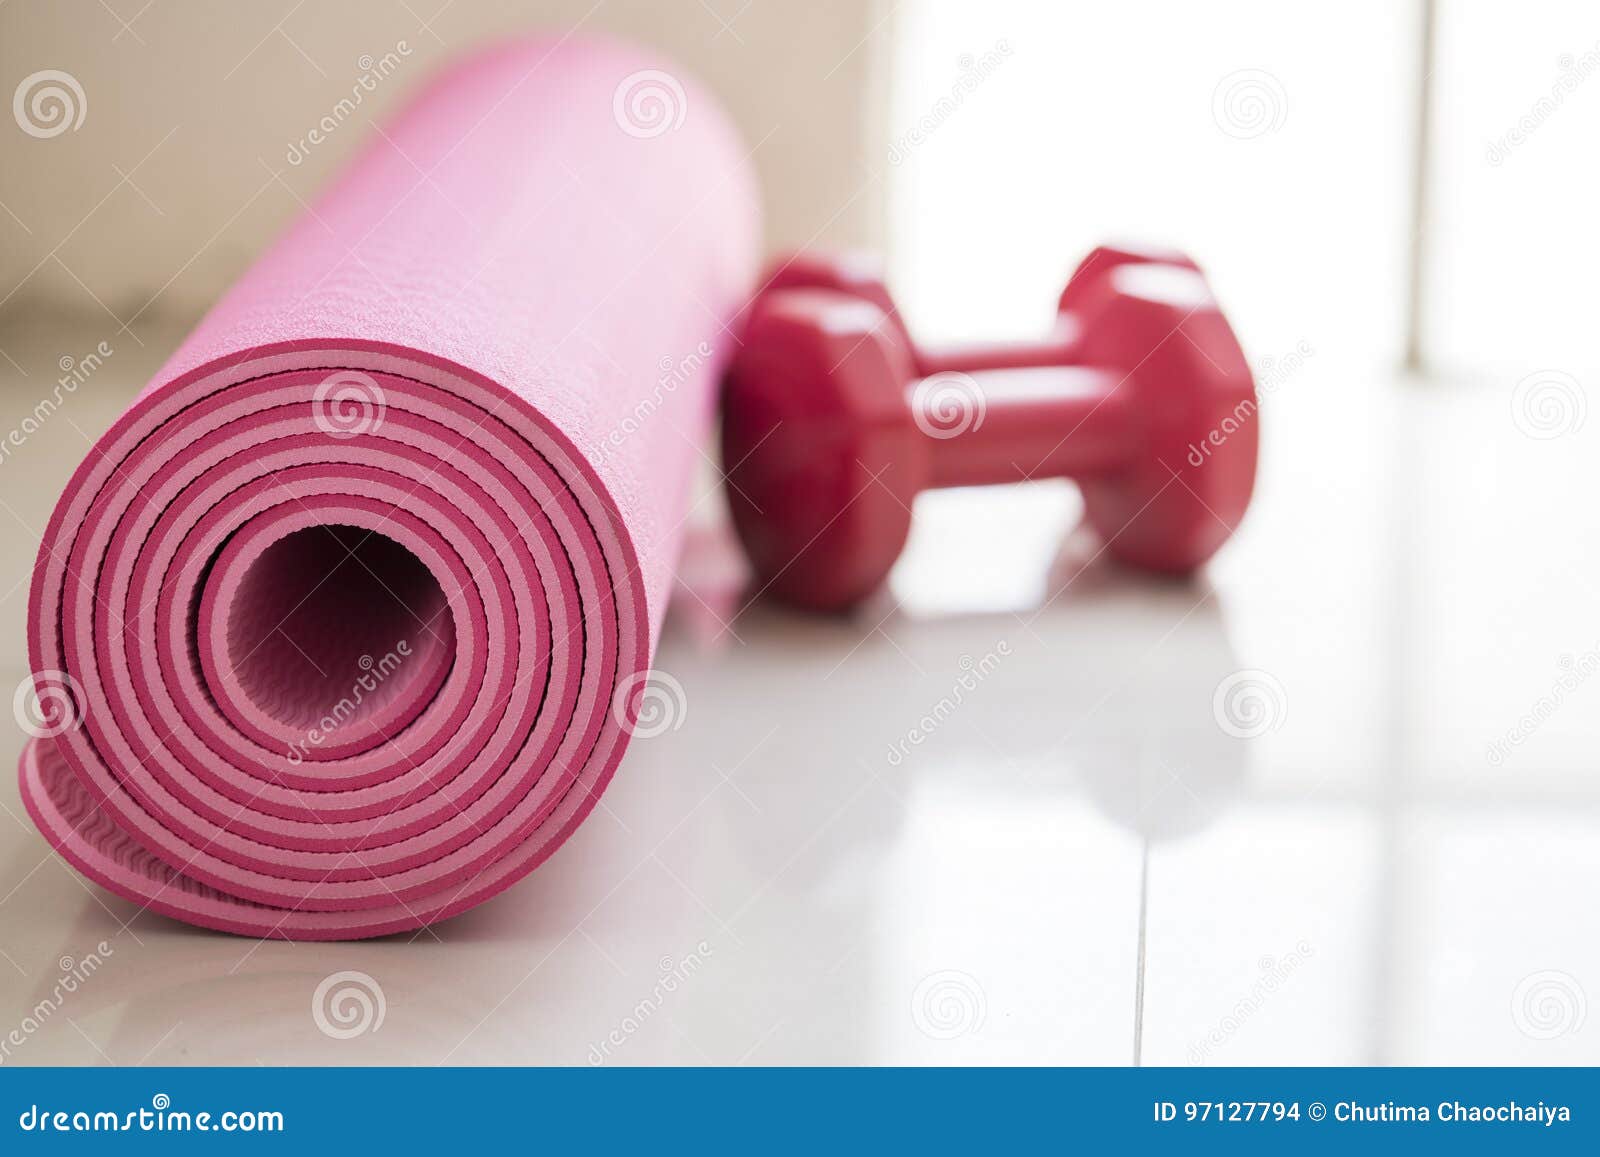 Dumbbell and Yoga Mat on Table Stock Photo - Image of pink, healthy ...